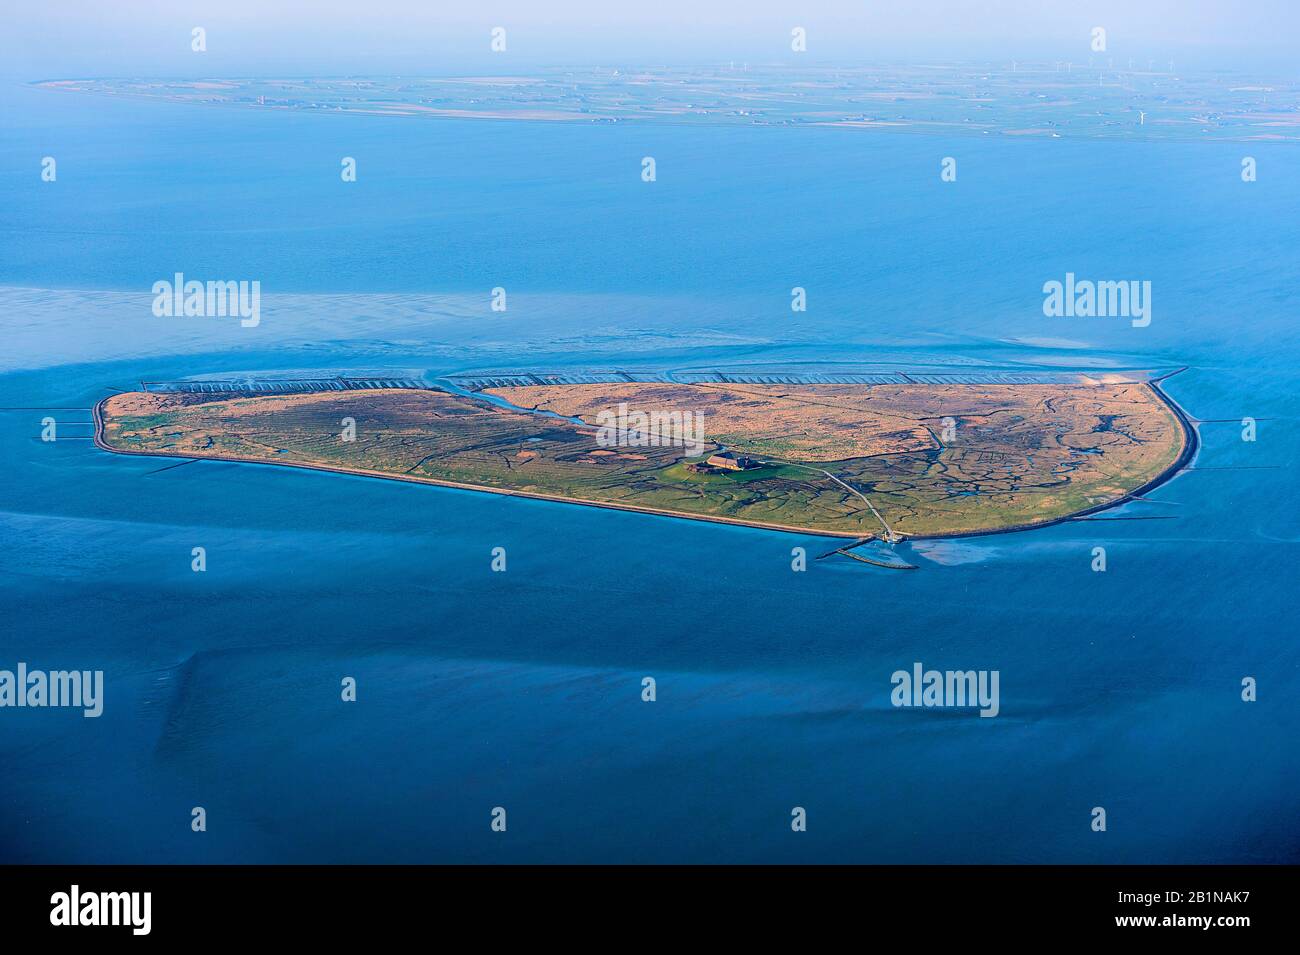 aerial view of Hallig Suederoog with marsh meadows and terp, Germany, Schleswig-Holstein, Schleswig-Holstein Wadden Sea National Park, Hallig Suederoog Stock Photo